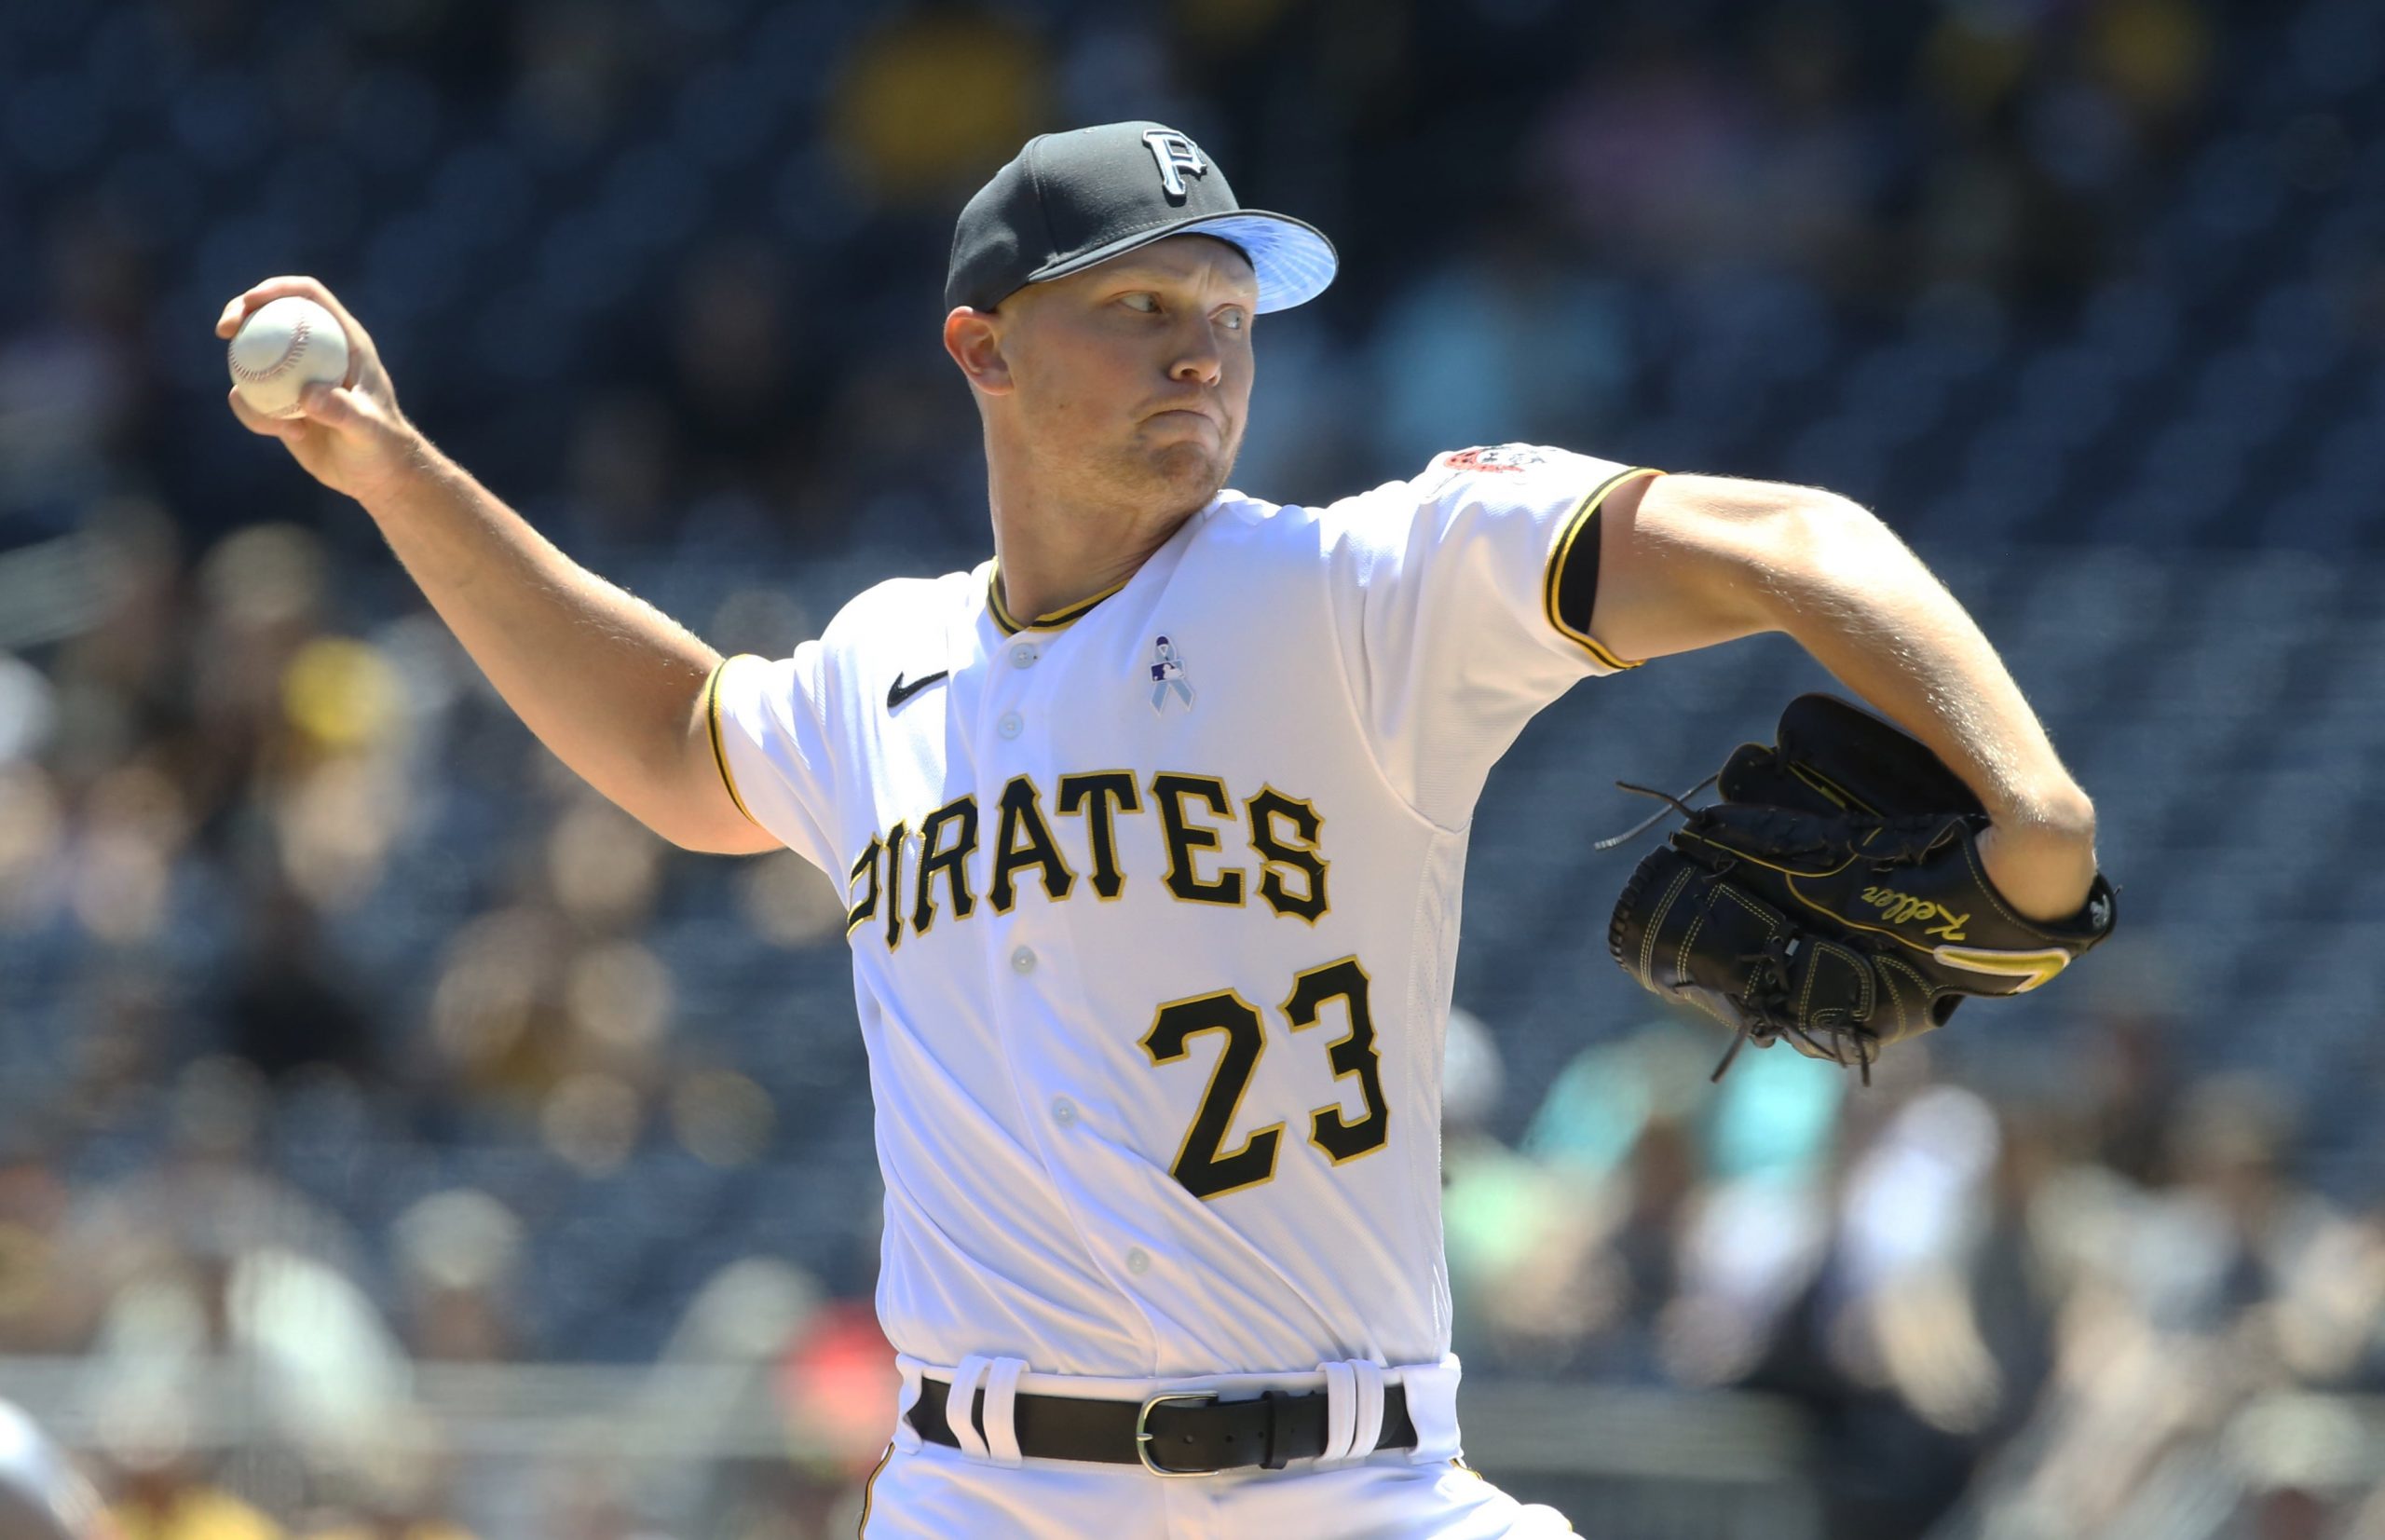 Jun 19, 2022; Pittsburgh, Pennsylvania, USA; Pittsburgh Pirates starting pitcher Mitch Keller (23) delivers a pitch against the San Francisco Giants during the first inning at PNC Park. Mandatory Credit: Charles LeClaire-USA TODAY Sports